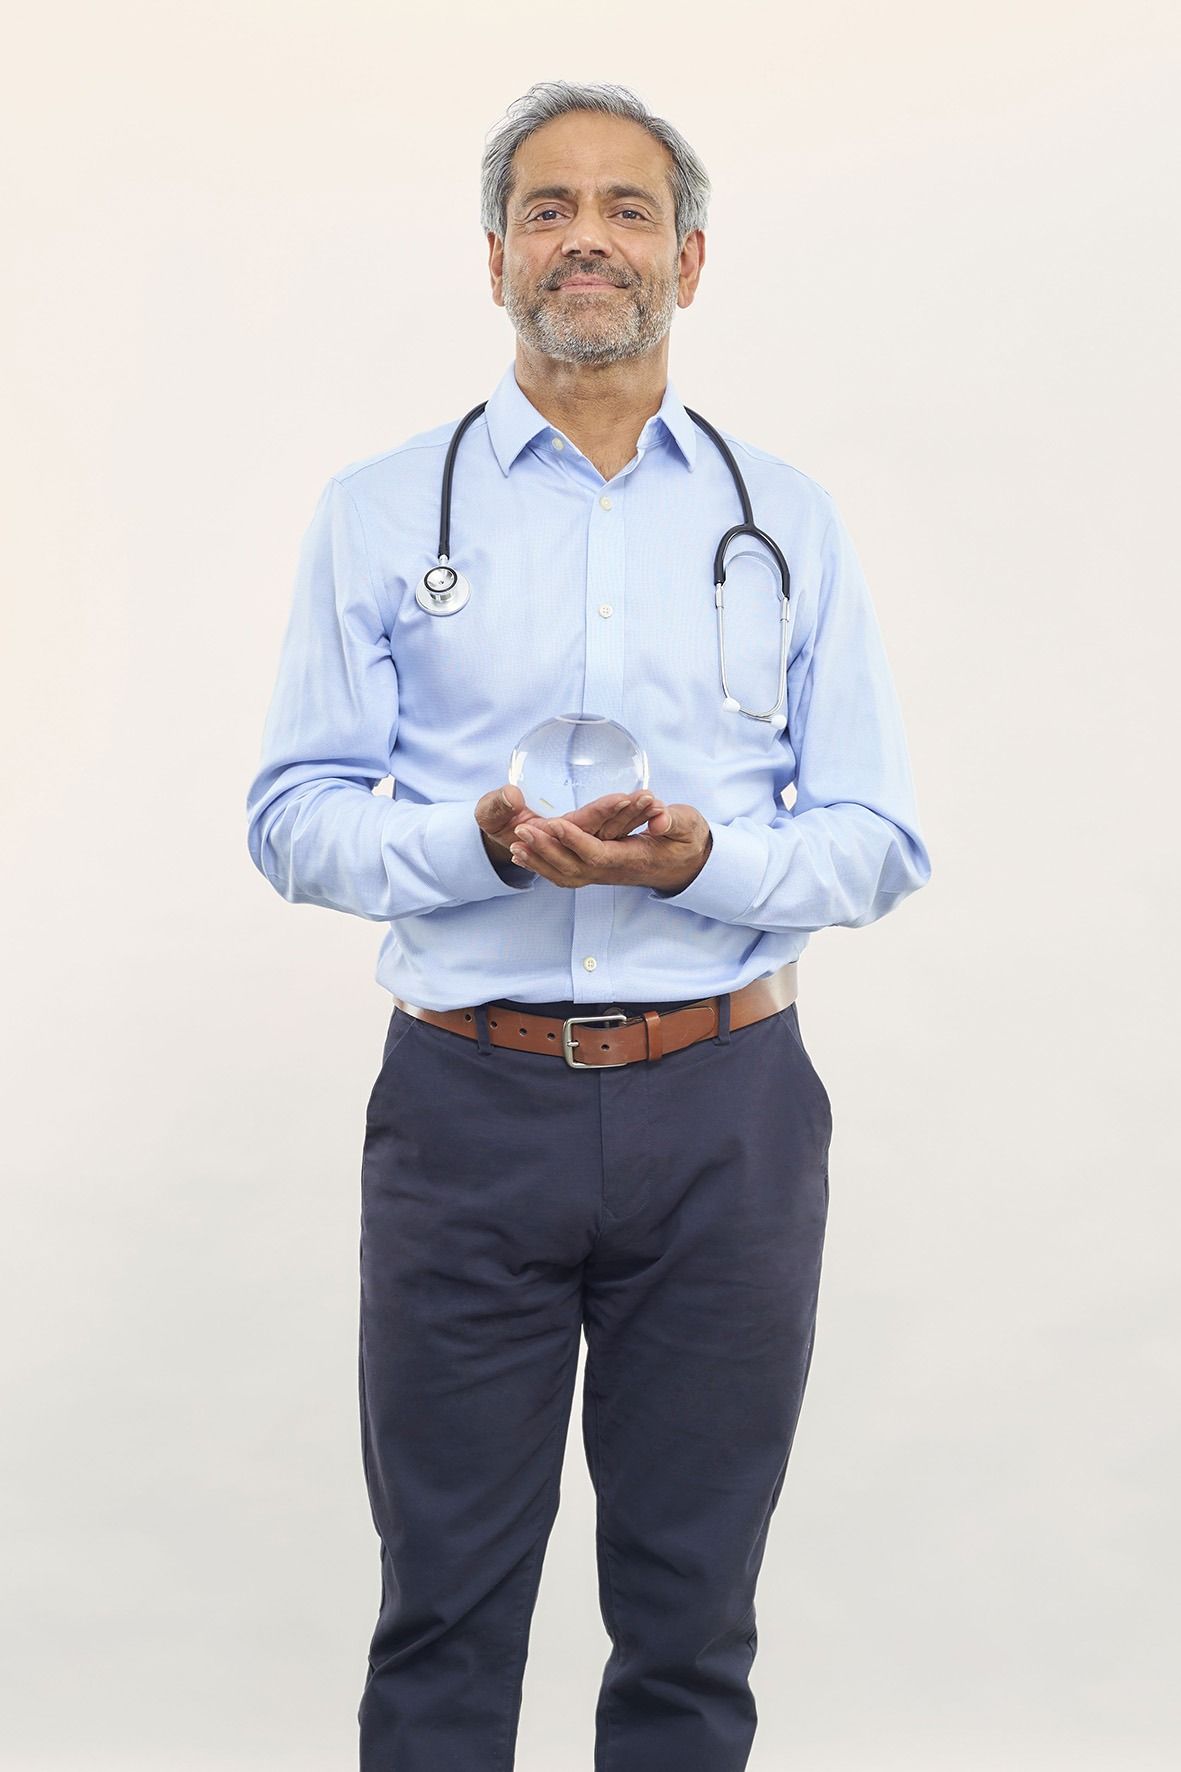 A doctor with a stethoscope around his neck is holding an Allurion Gastric Balloon that has been filled with 550ml of saline solution